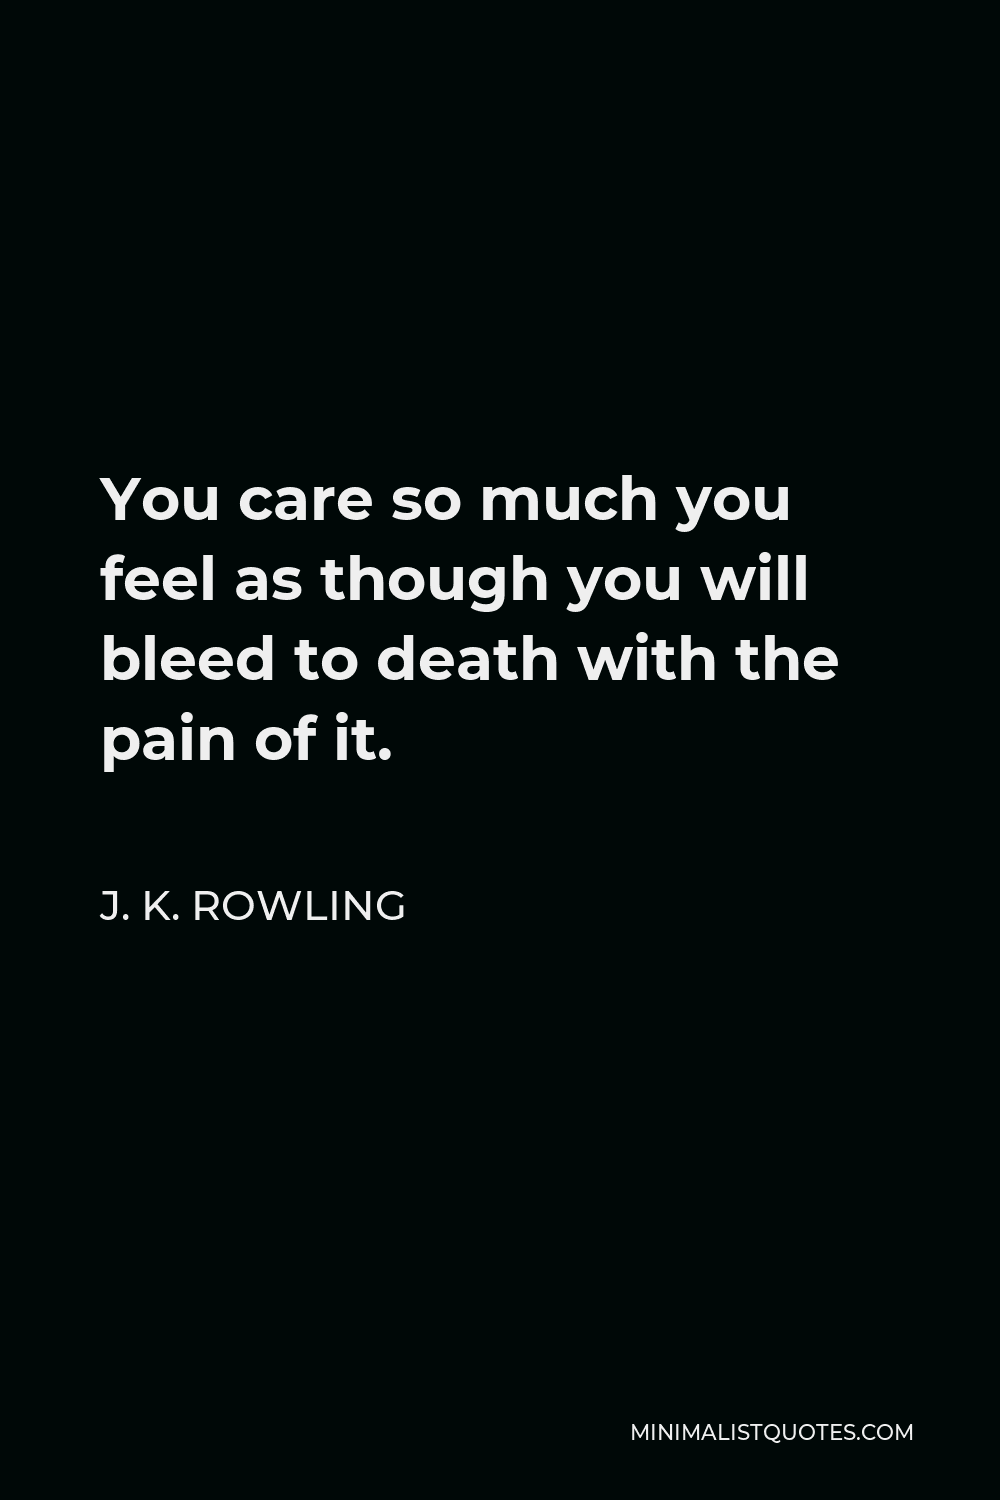 J. K. Rowling Quote - You care so much you feel as though you will bleed to death with the pain of it.